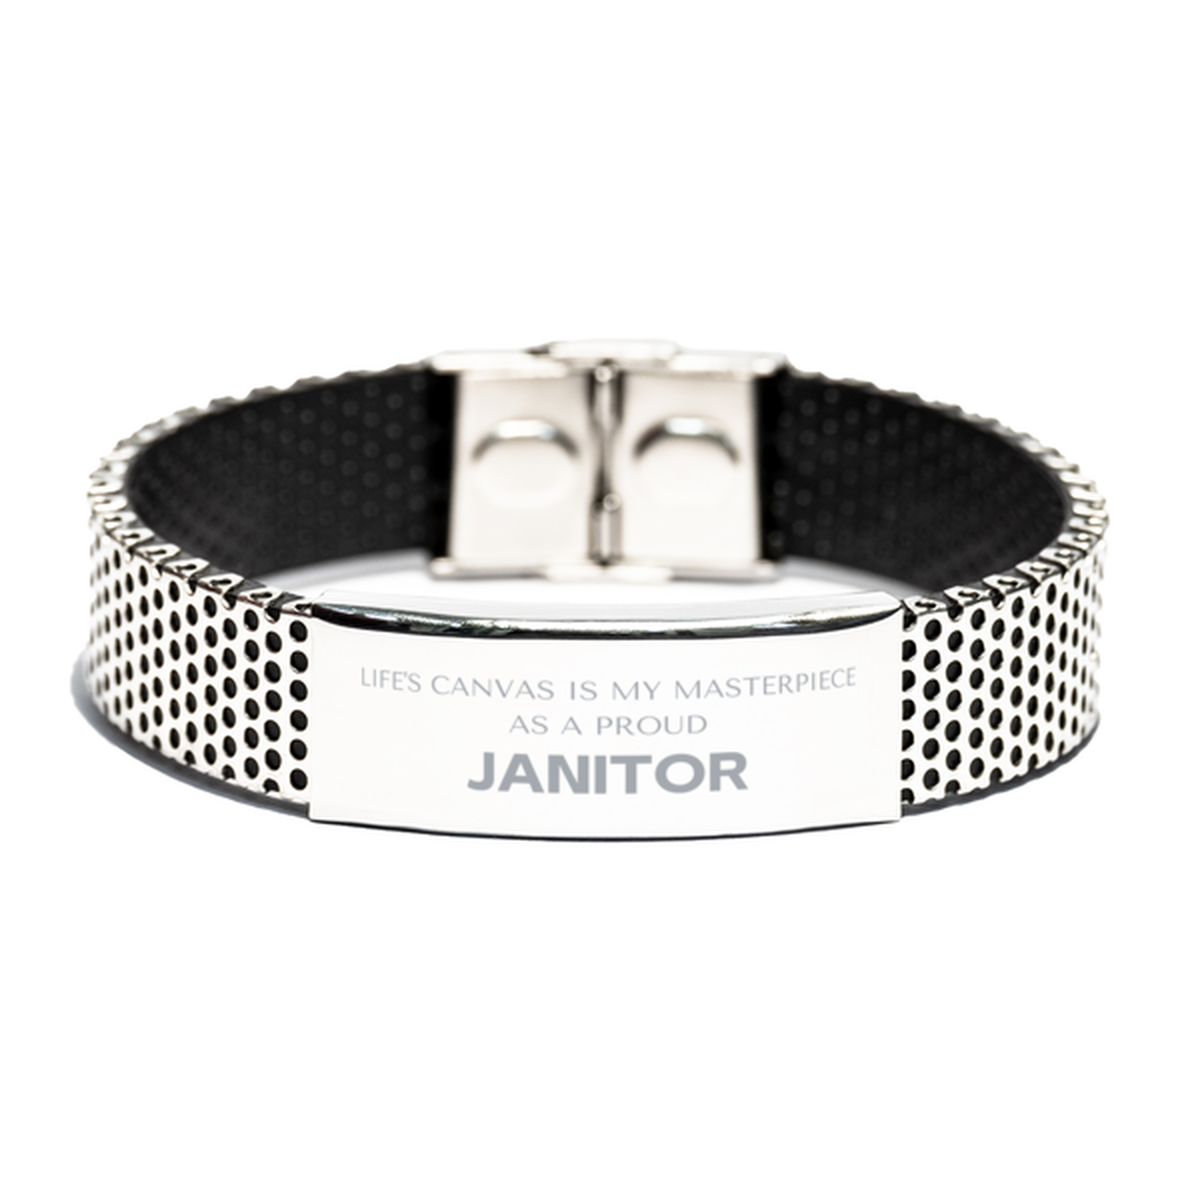 Proud Janitor Gifts, Life's canvas is my masterpiece, Epic Birthday Christmas Unique Stainless Steel Bracelet For Janitor, Coworkers, Men, Women, Friends